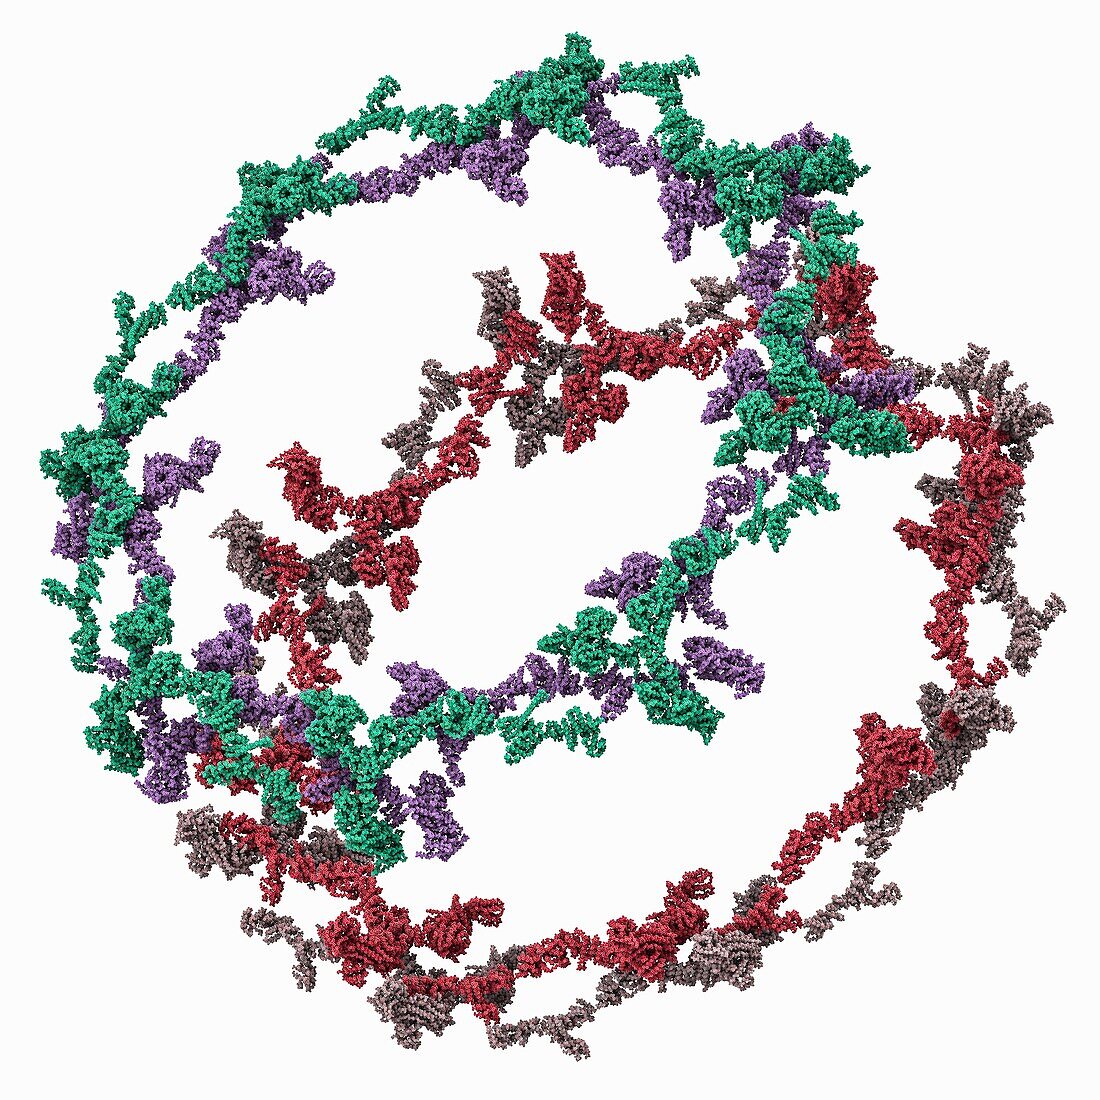 Outer rings of the human nuclear pore, molecular model